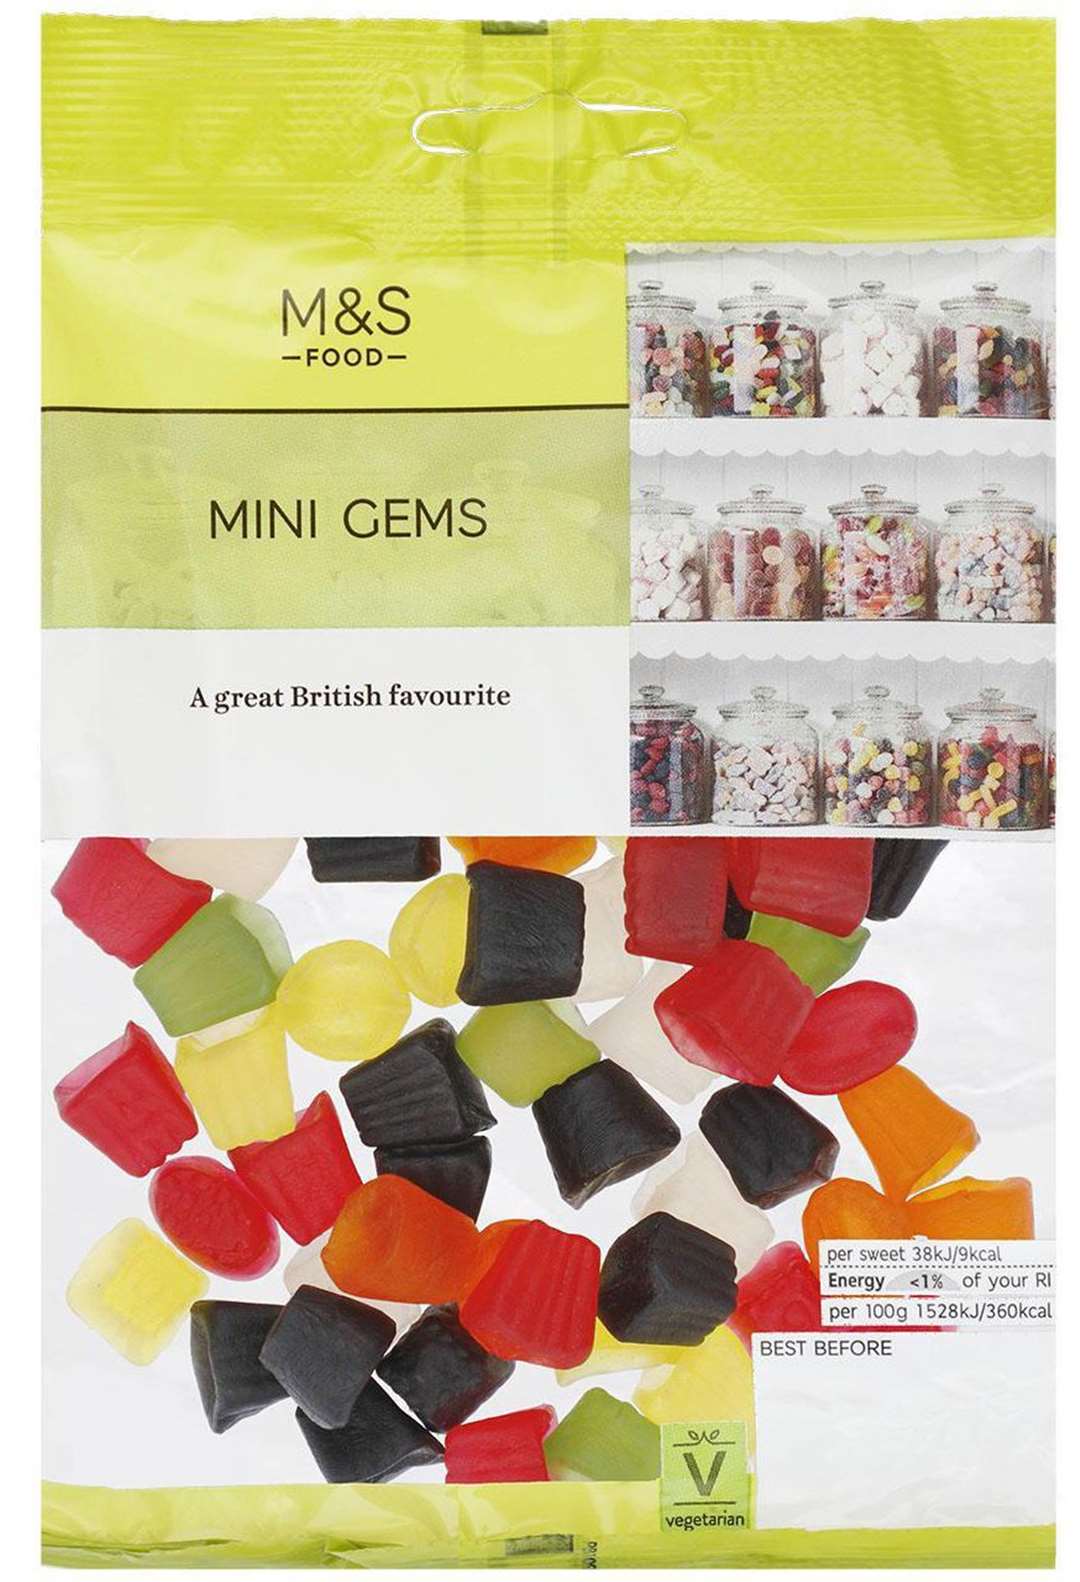 A packet of Marks & Spencer Mini Gems, formerly known as Midget Gems (Marks & Spencer/PA)